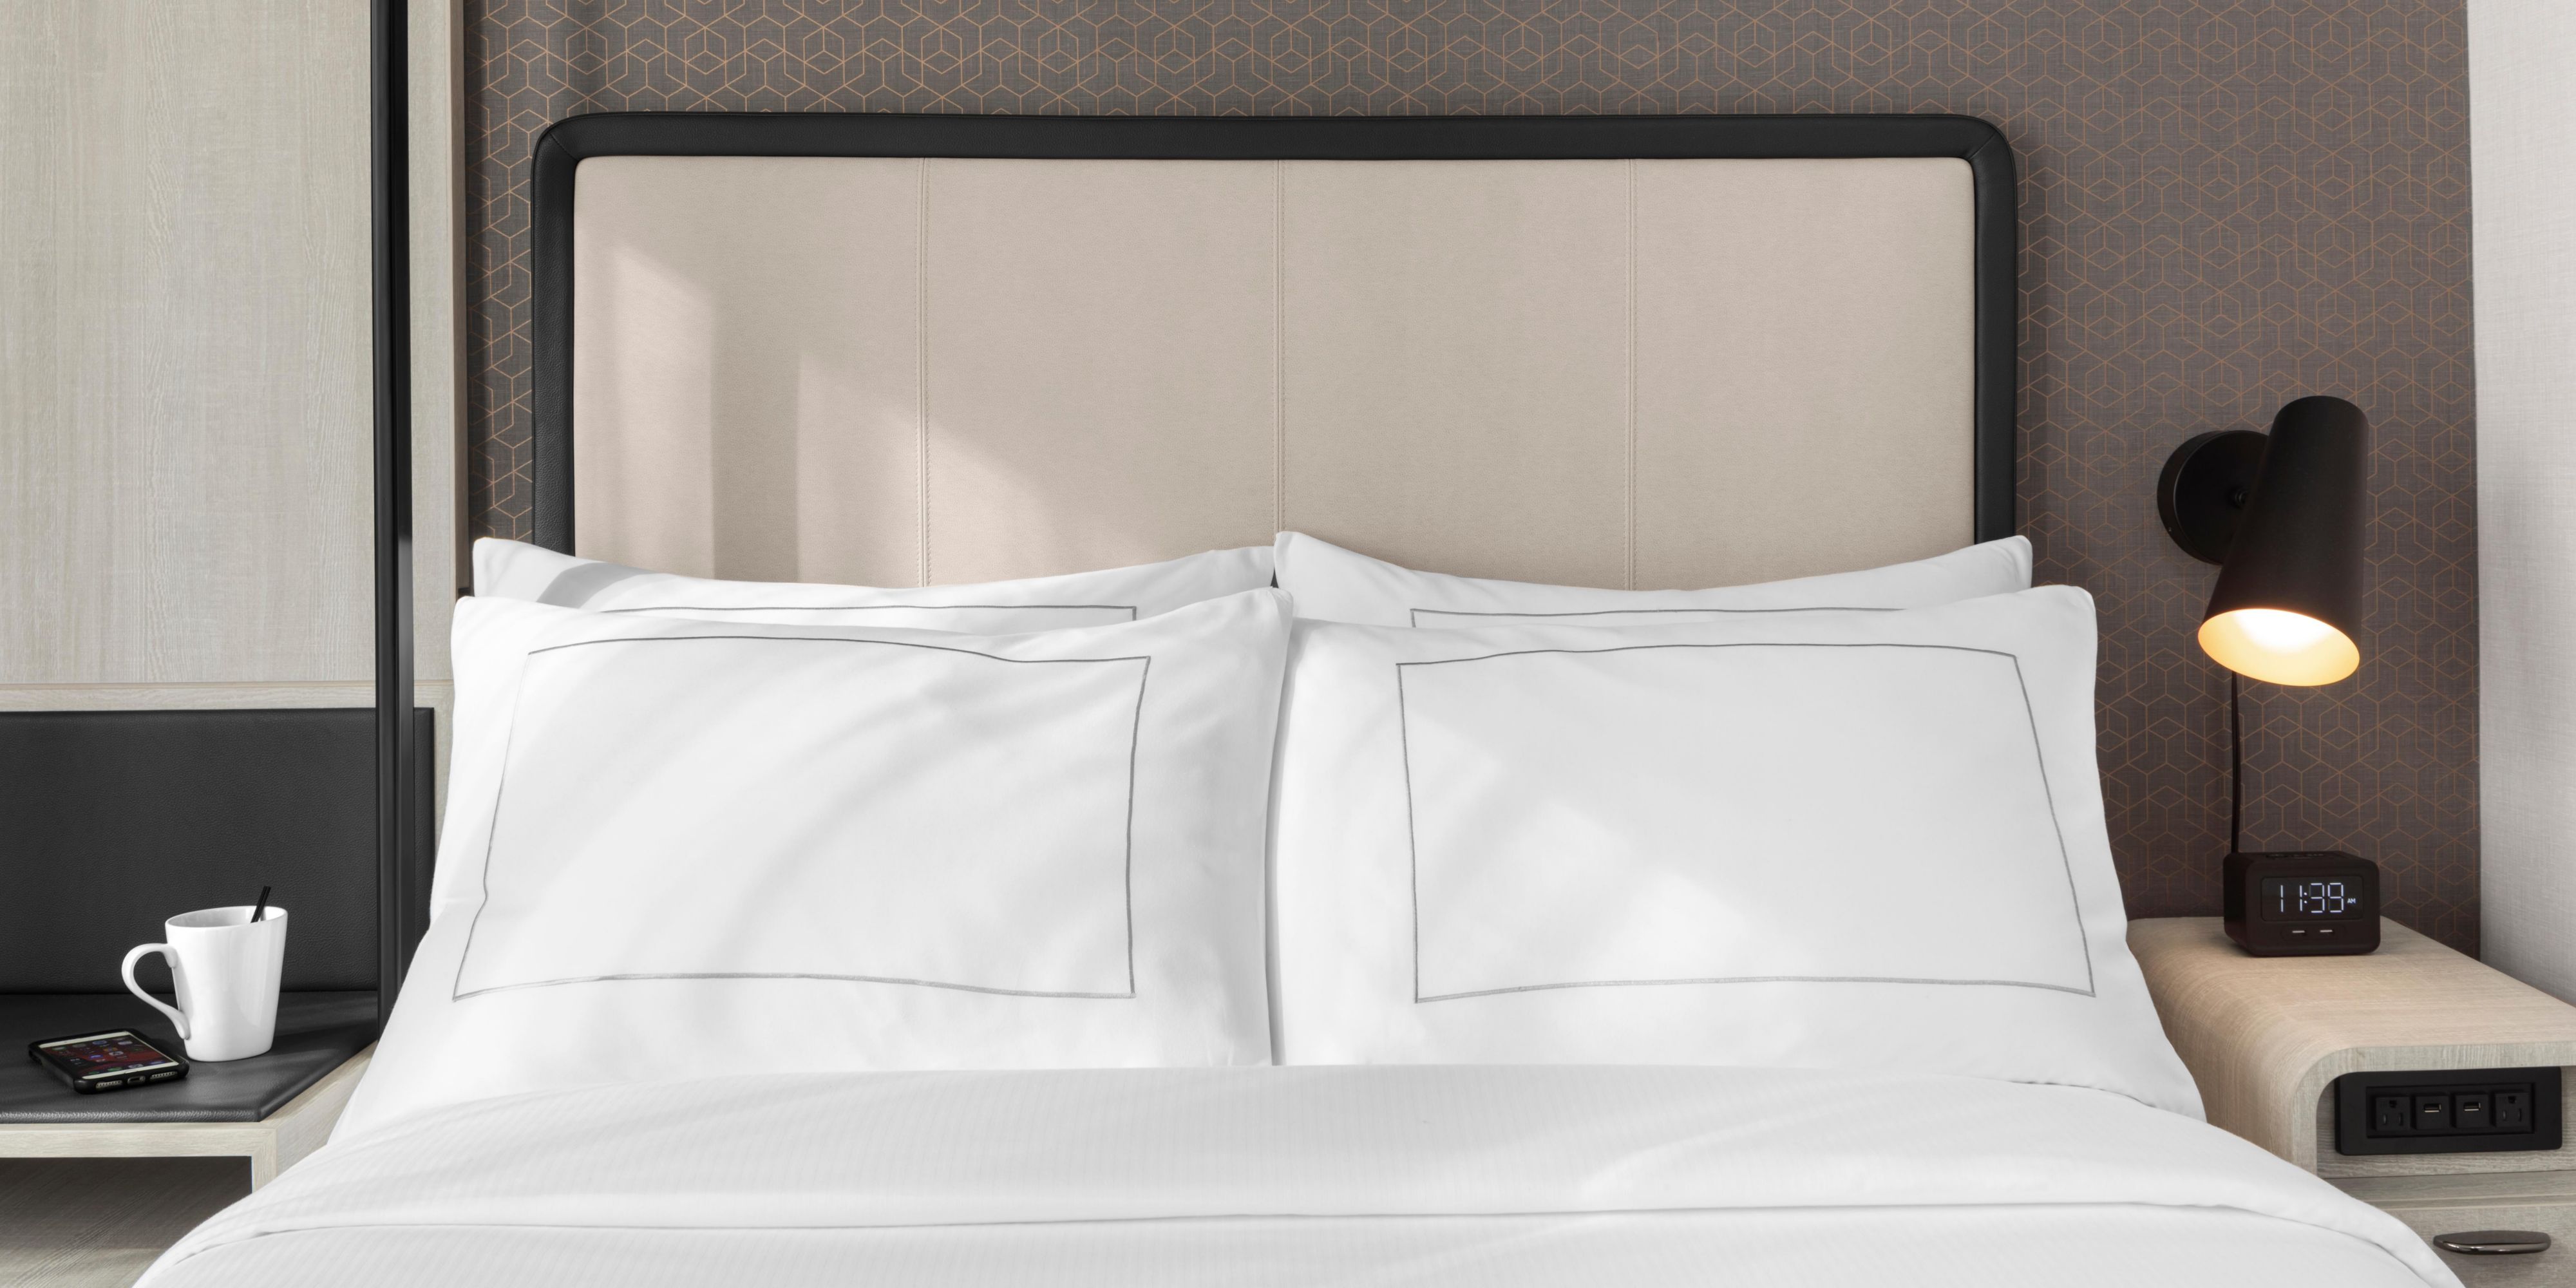 Rest easy with plush linens &amp; thoughtful touches at voco Chicago.